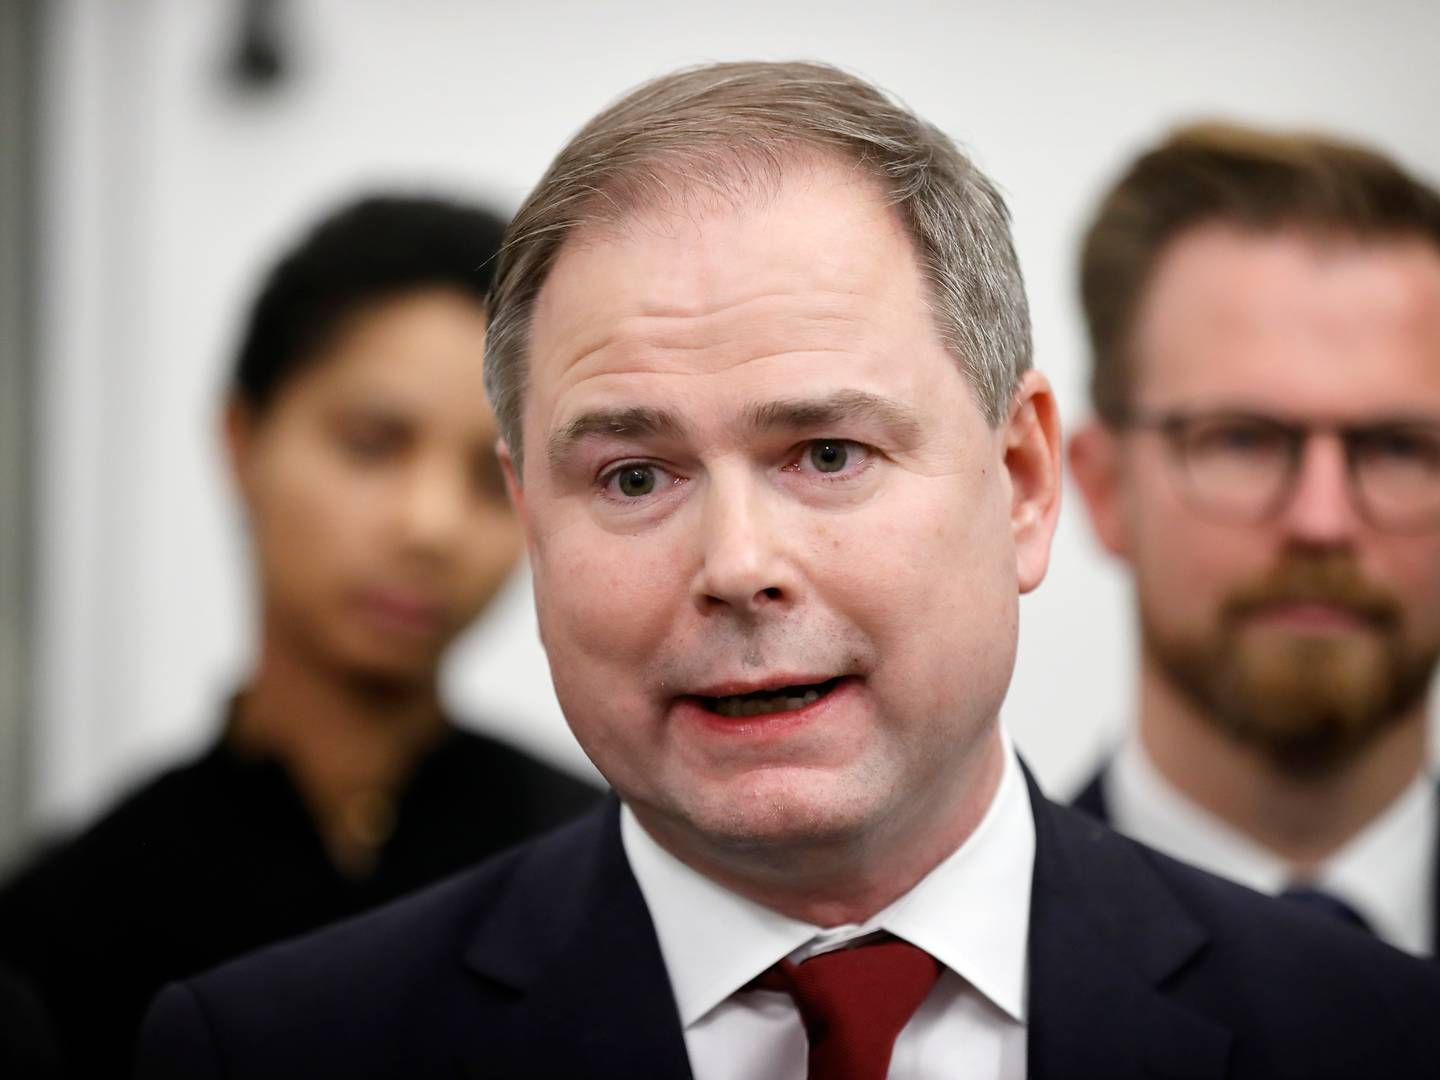 Danish Finance Minister Nicolai Wammen generally avoids expressing his views on what pension companies should invest in. | Photo: Jens Dresling